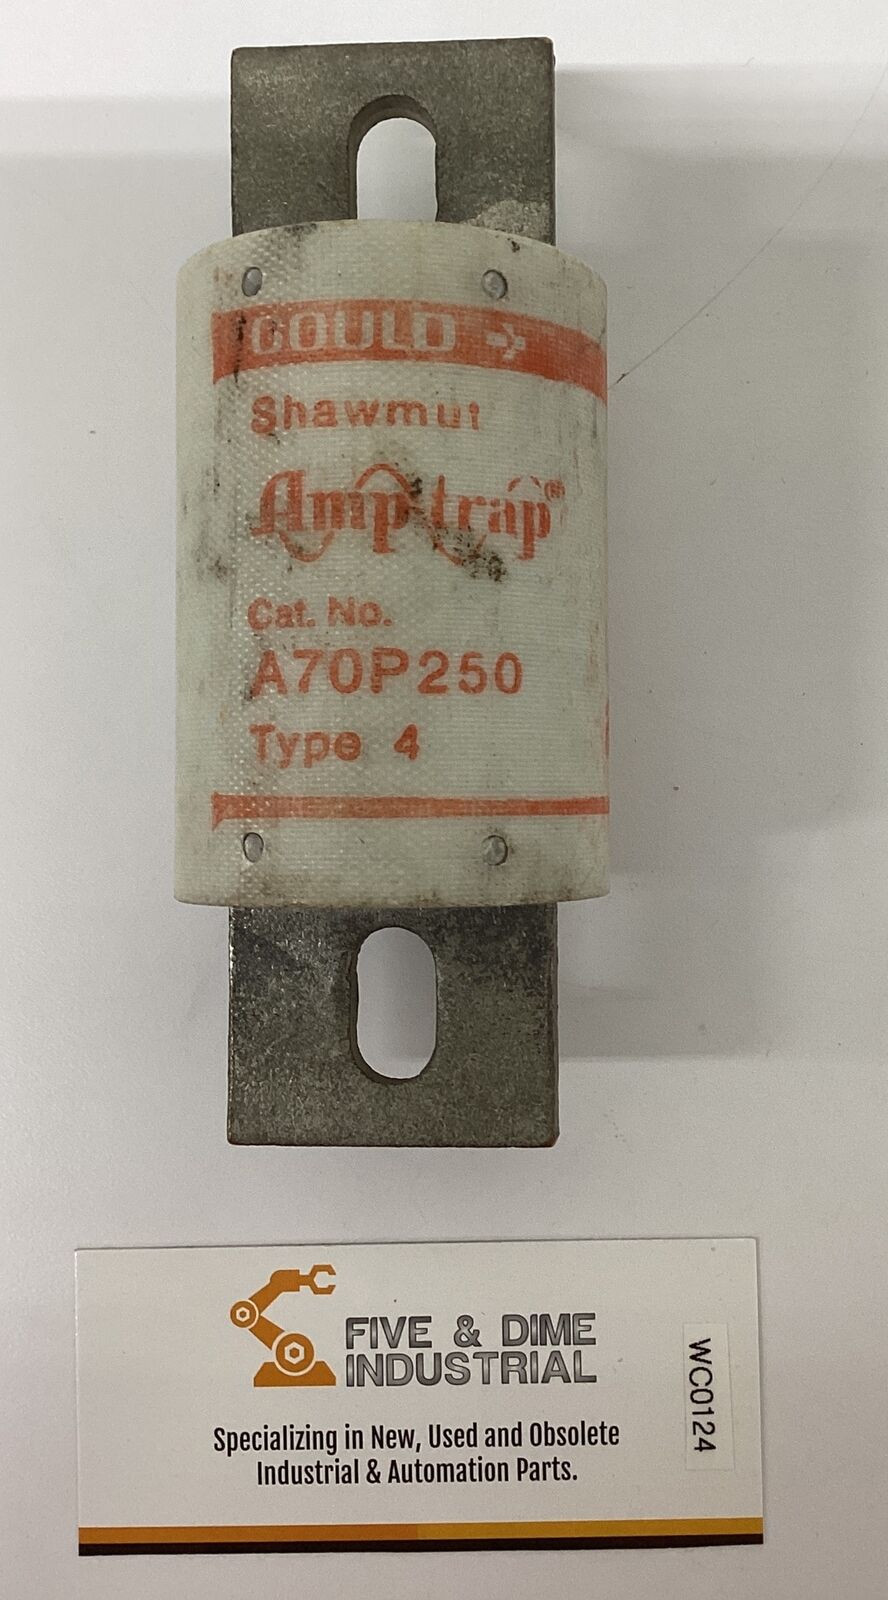 Mersen Gould A70P250 Amp-Trap type 4 Fuse 250A 700V (RE204)